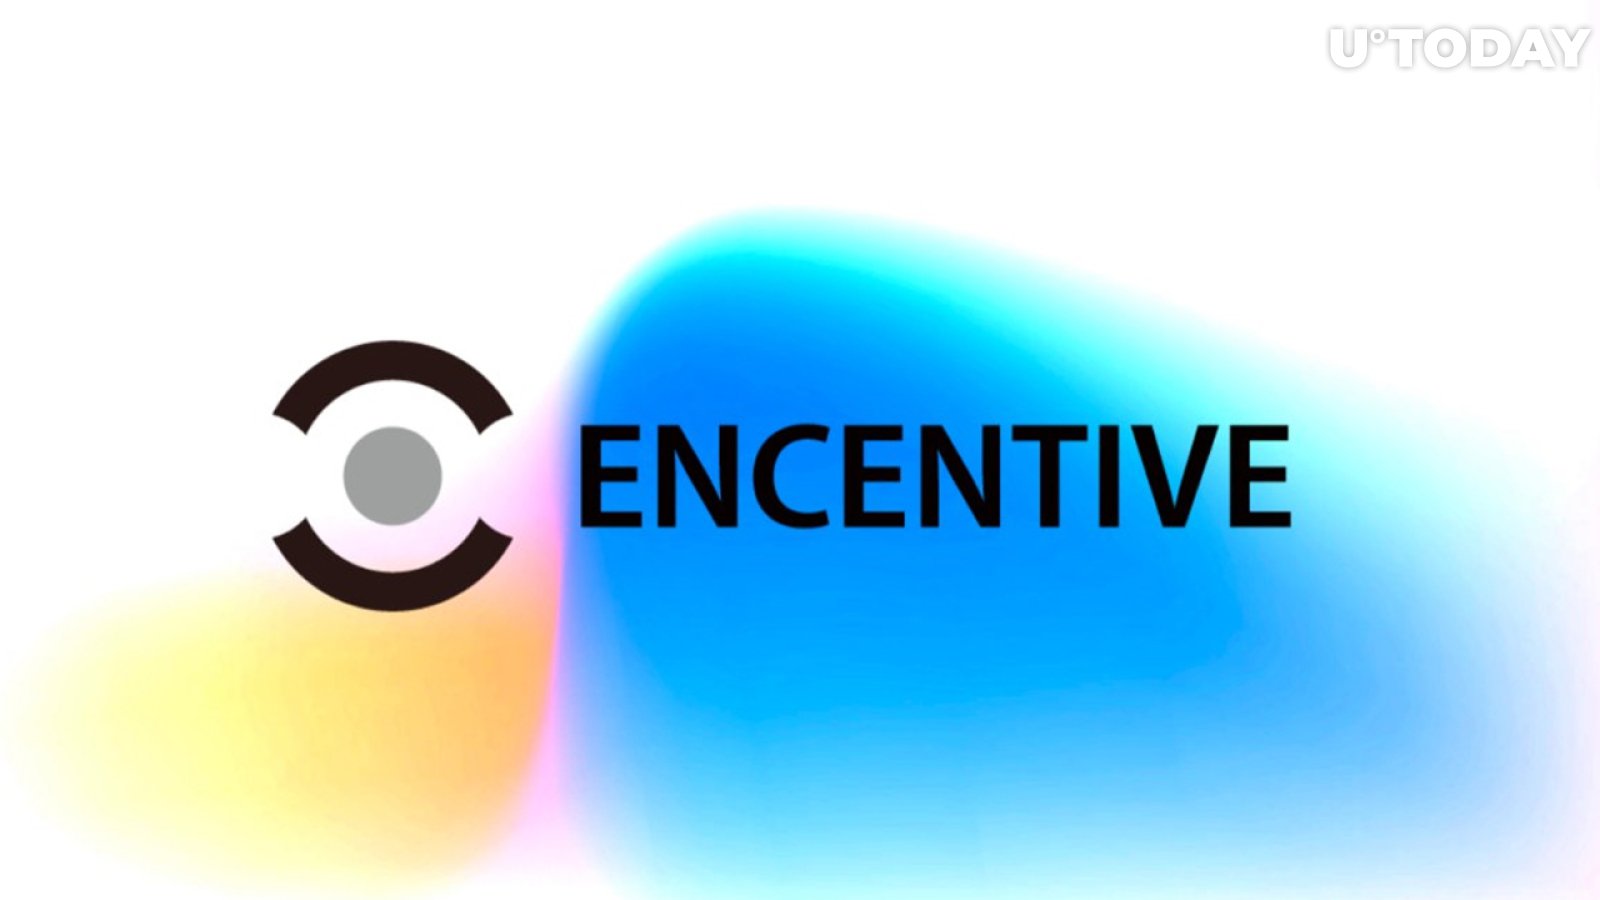 Encentive: The best building tool in the DEX era